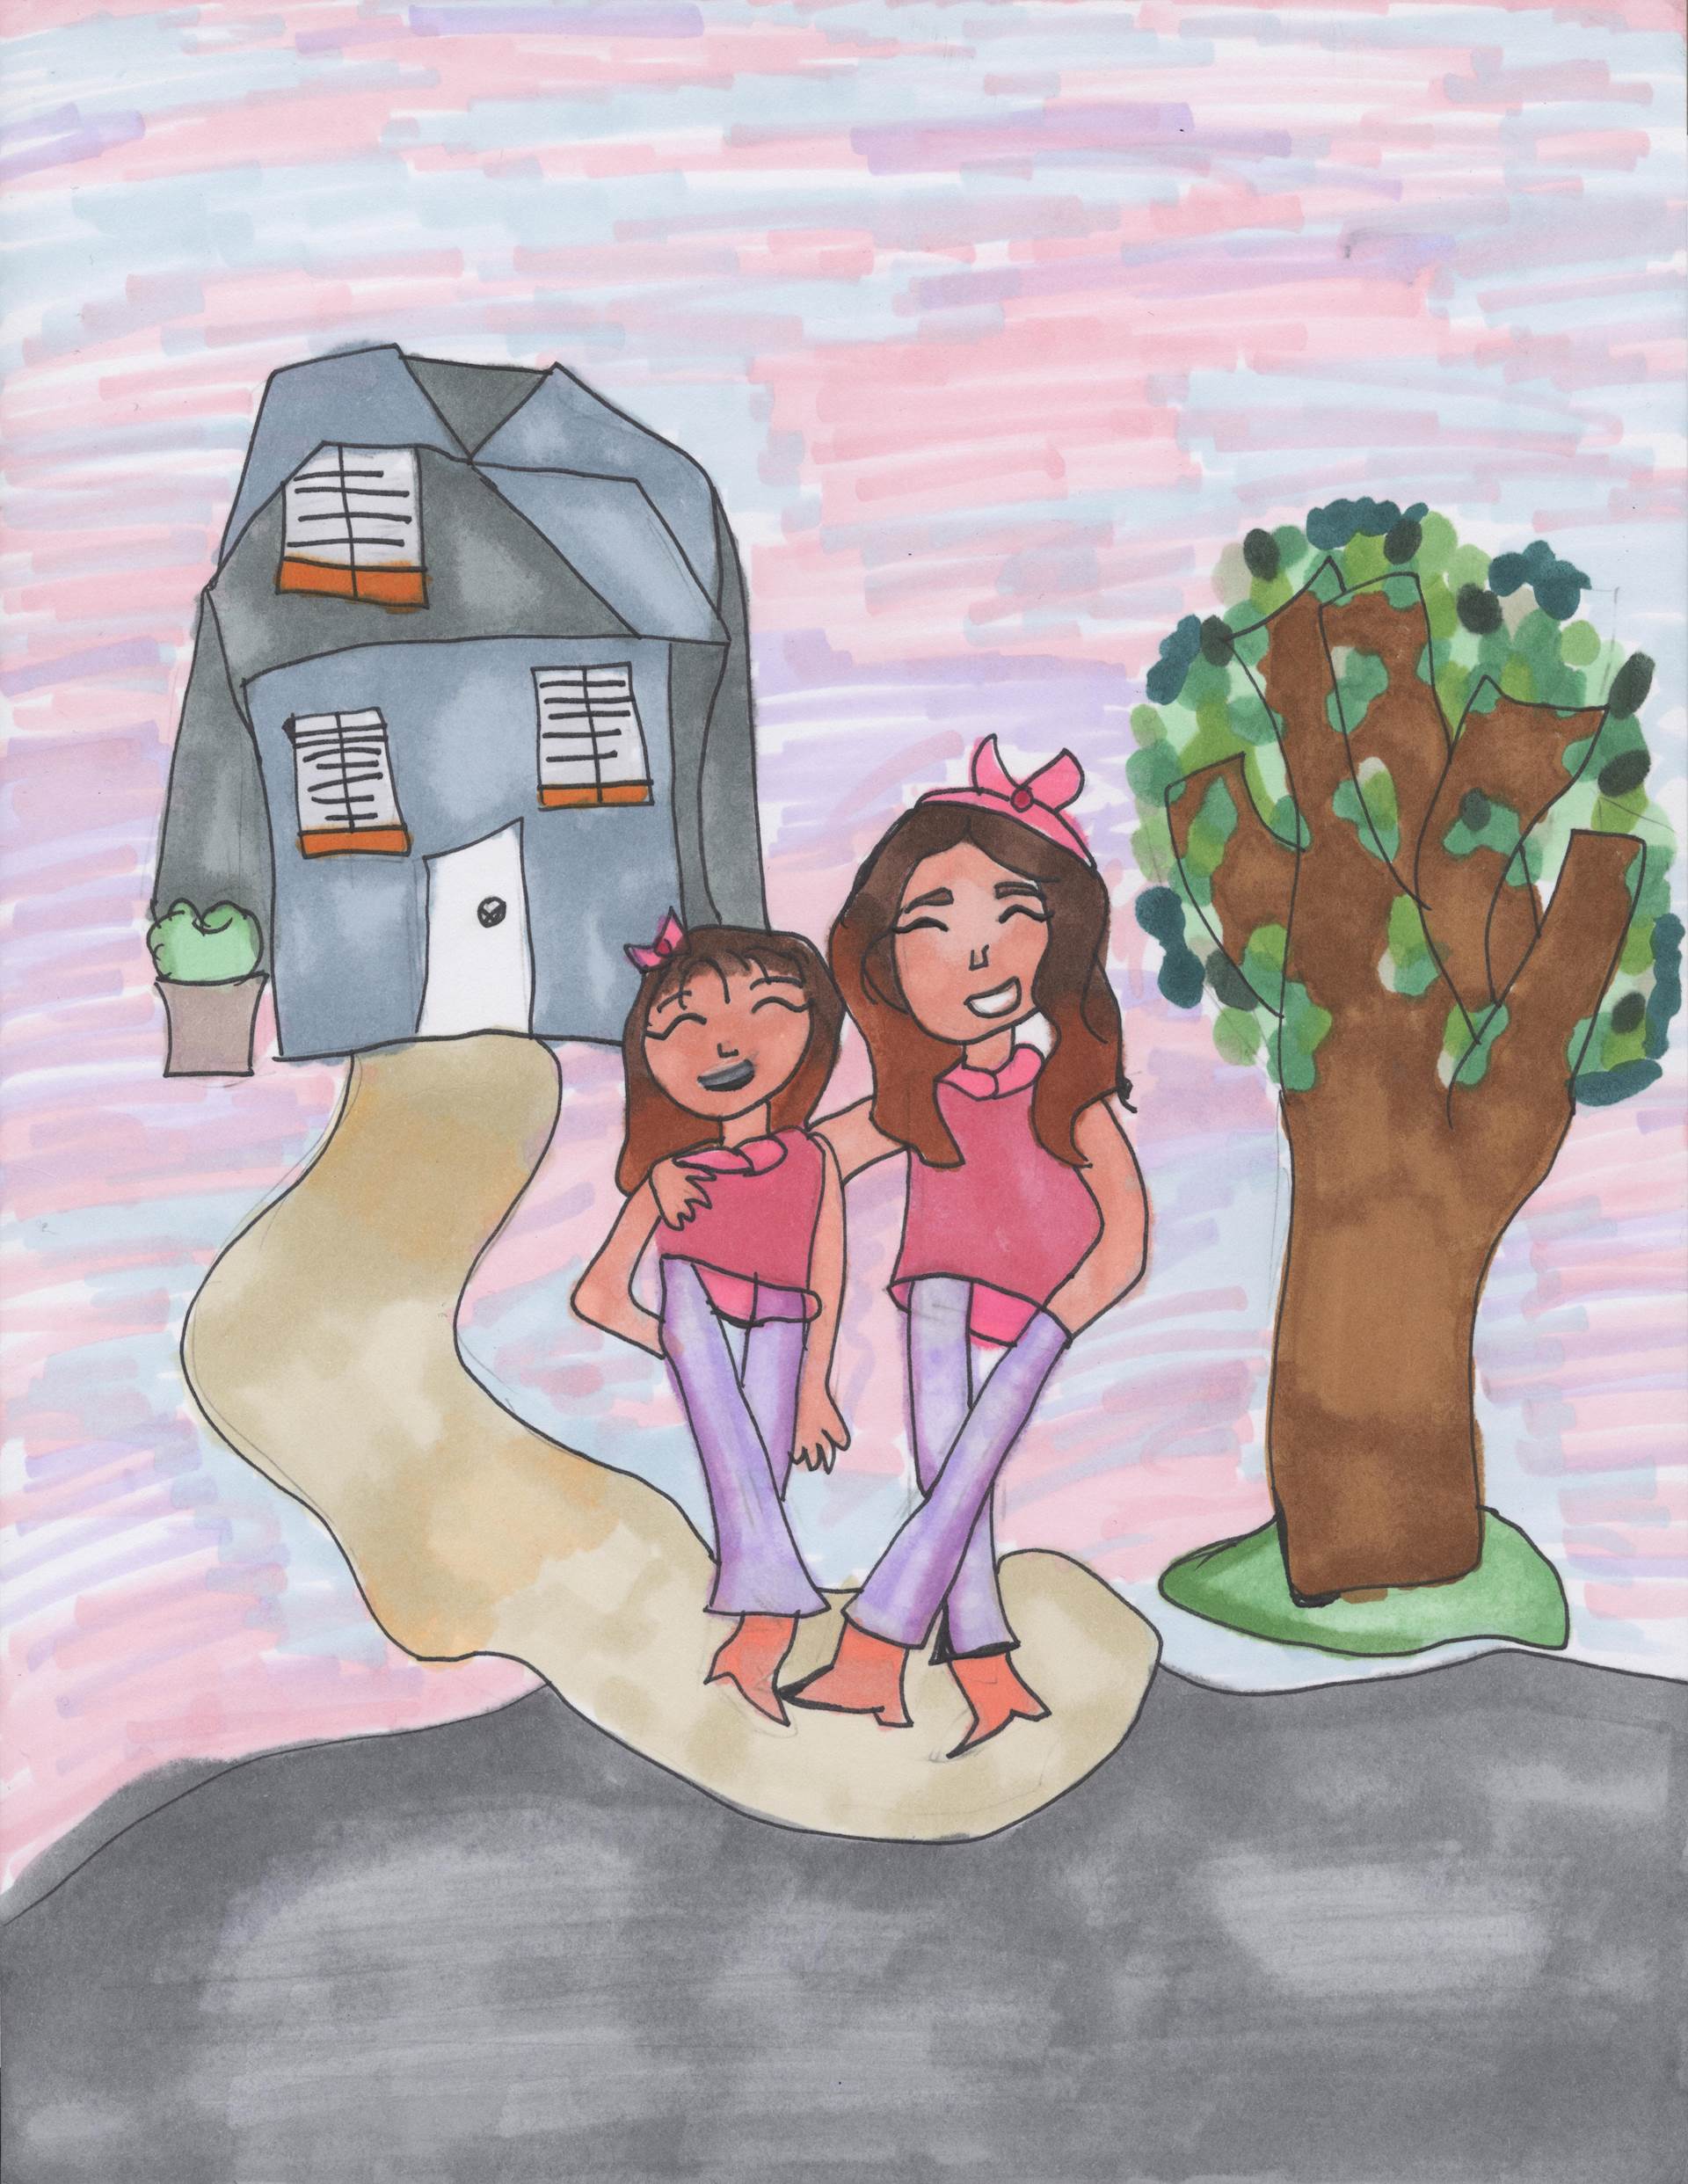 Kids drawing of two girls standing in front of a house and tree